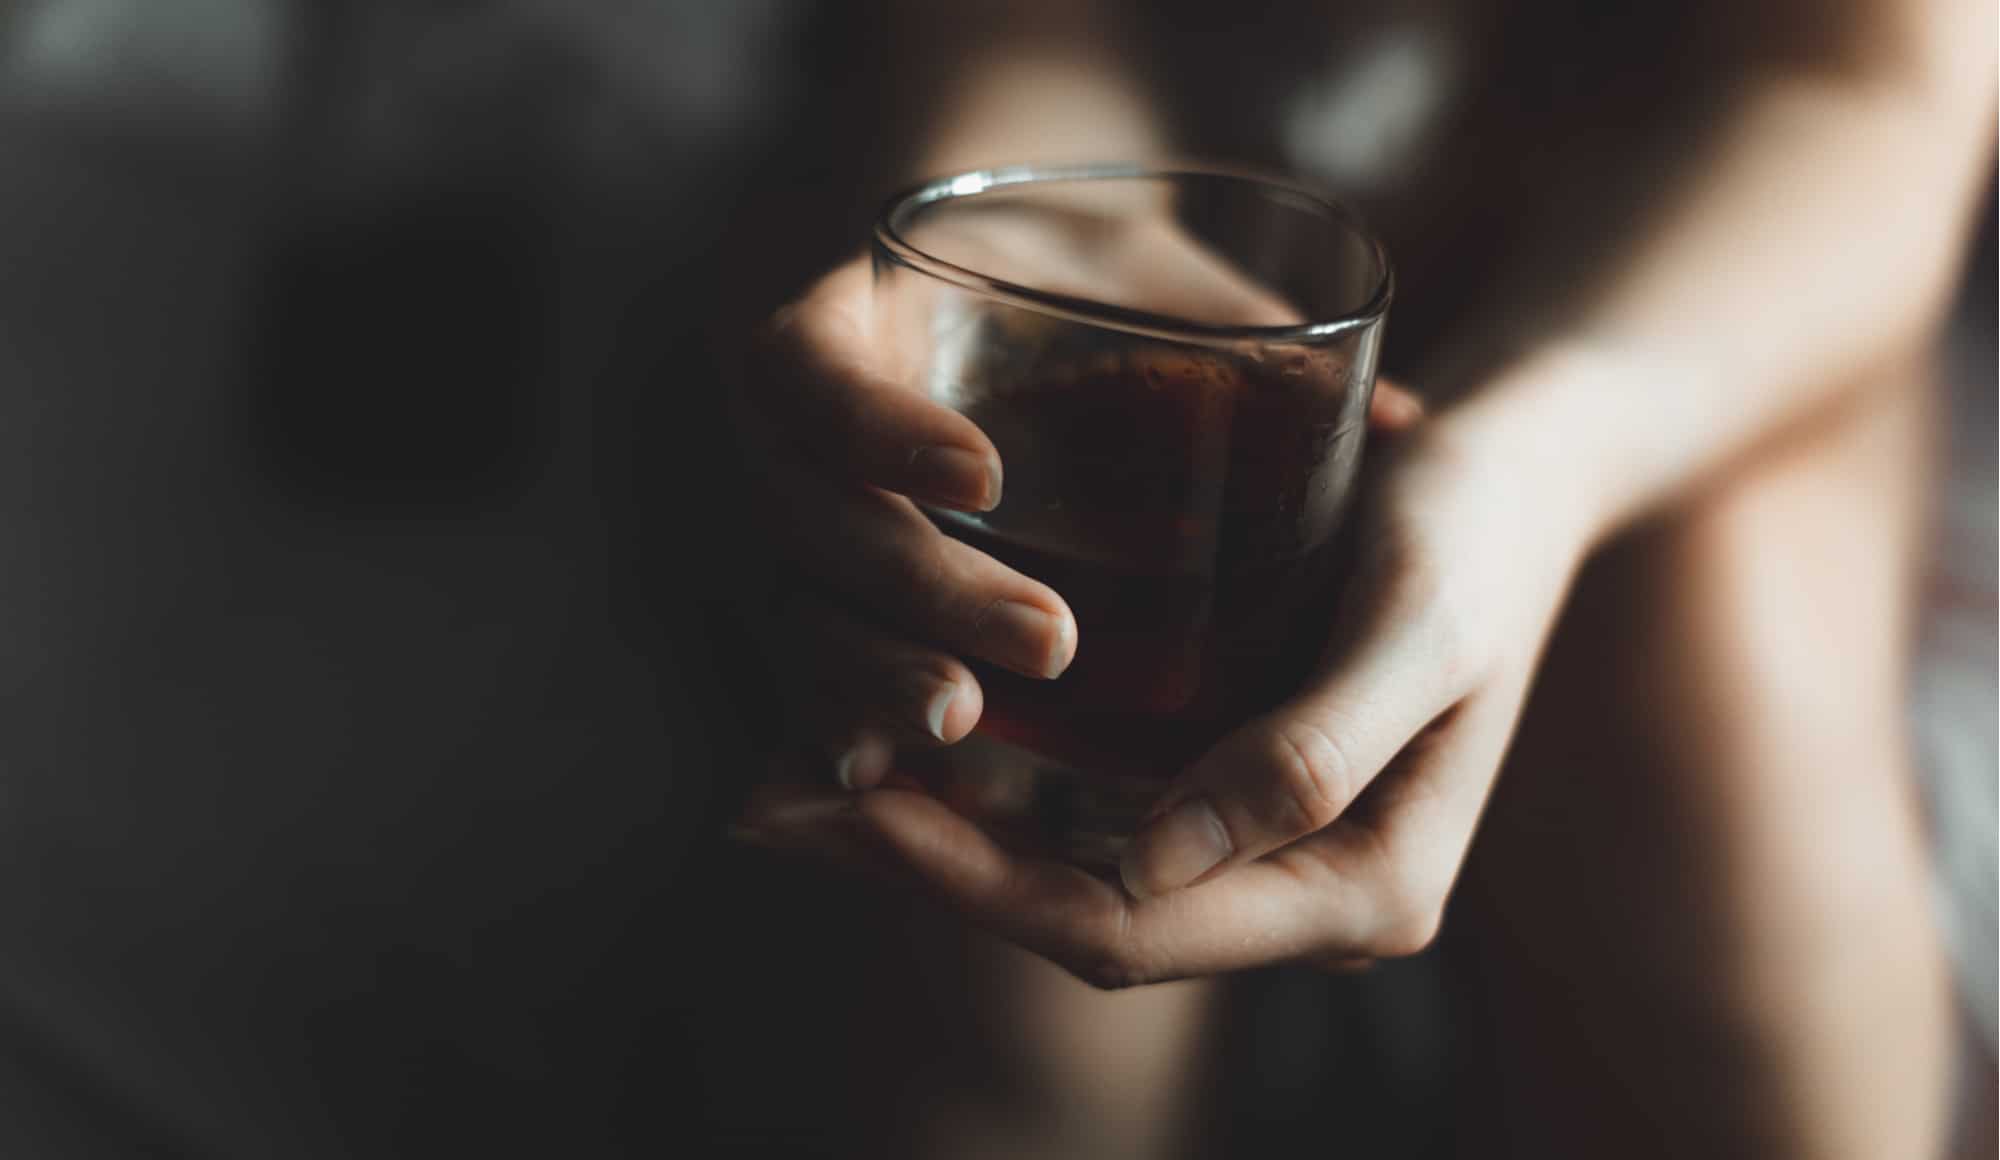 Alcohol Abuse is on the Rise for Women Pathfinders - A woman is struggling with her alcohol abuse and debating whether or not an alcohol rehab program is the right option for her to overcome her alcoholism.